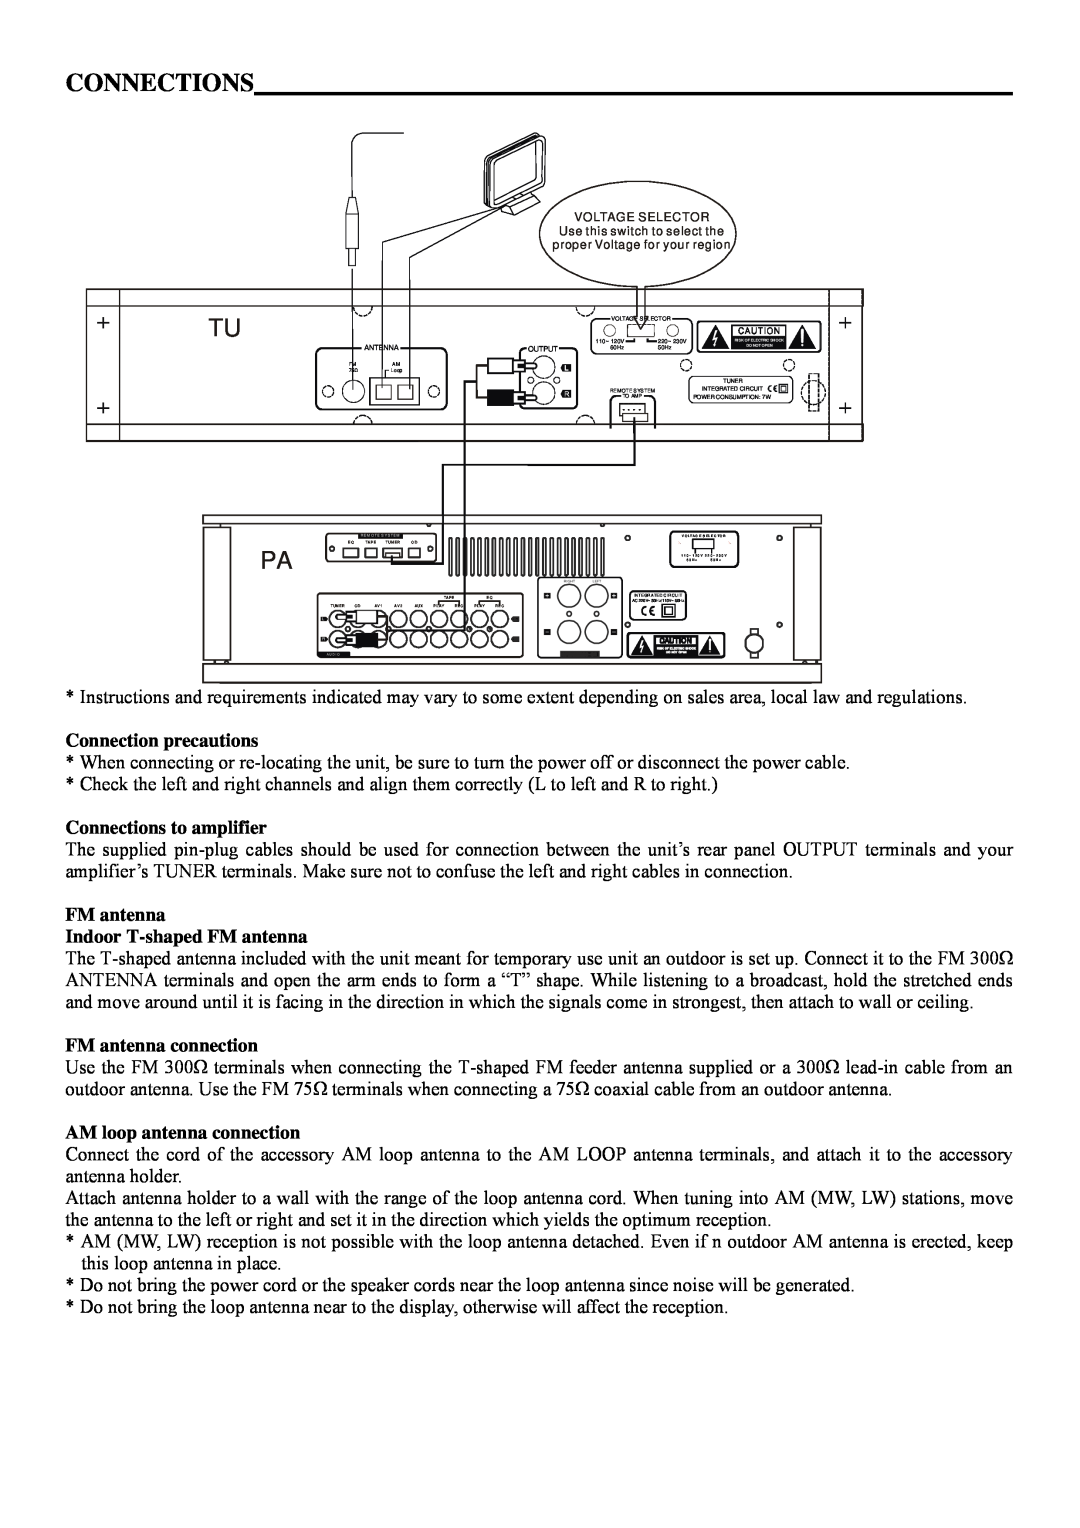 Pyramid Technologies PR-332T Connection precautions, Connections to amplifier, FM antenna Indoor T-shapedFM antenna 